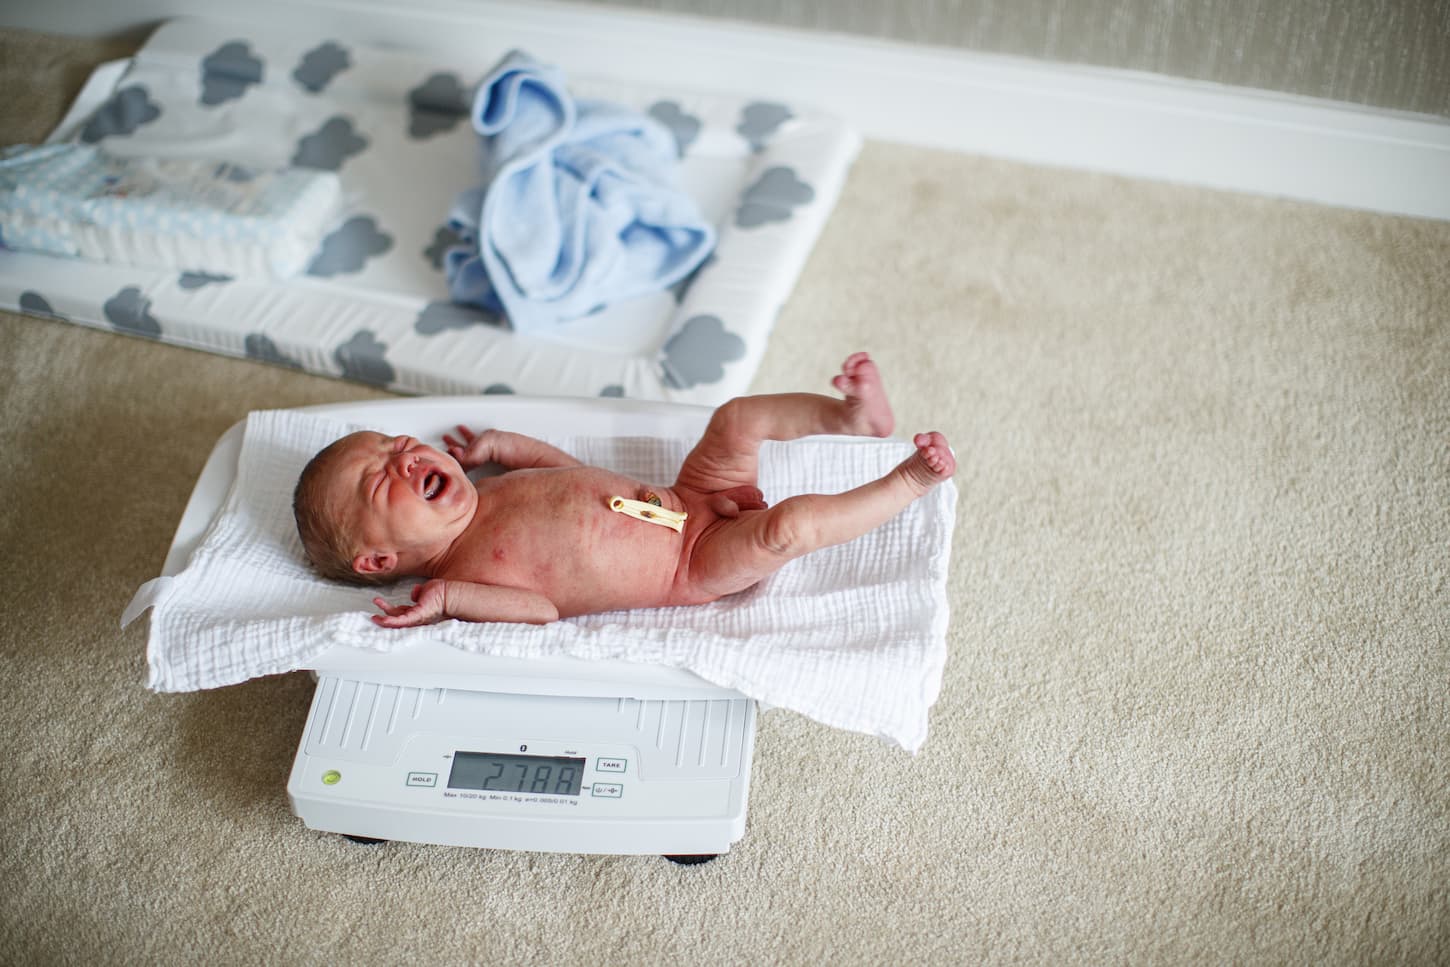 An image of crying newborn baby lying on a weighing scales.